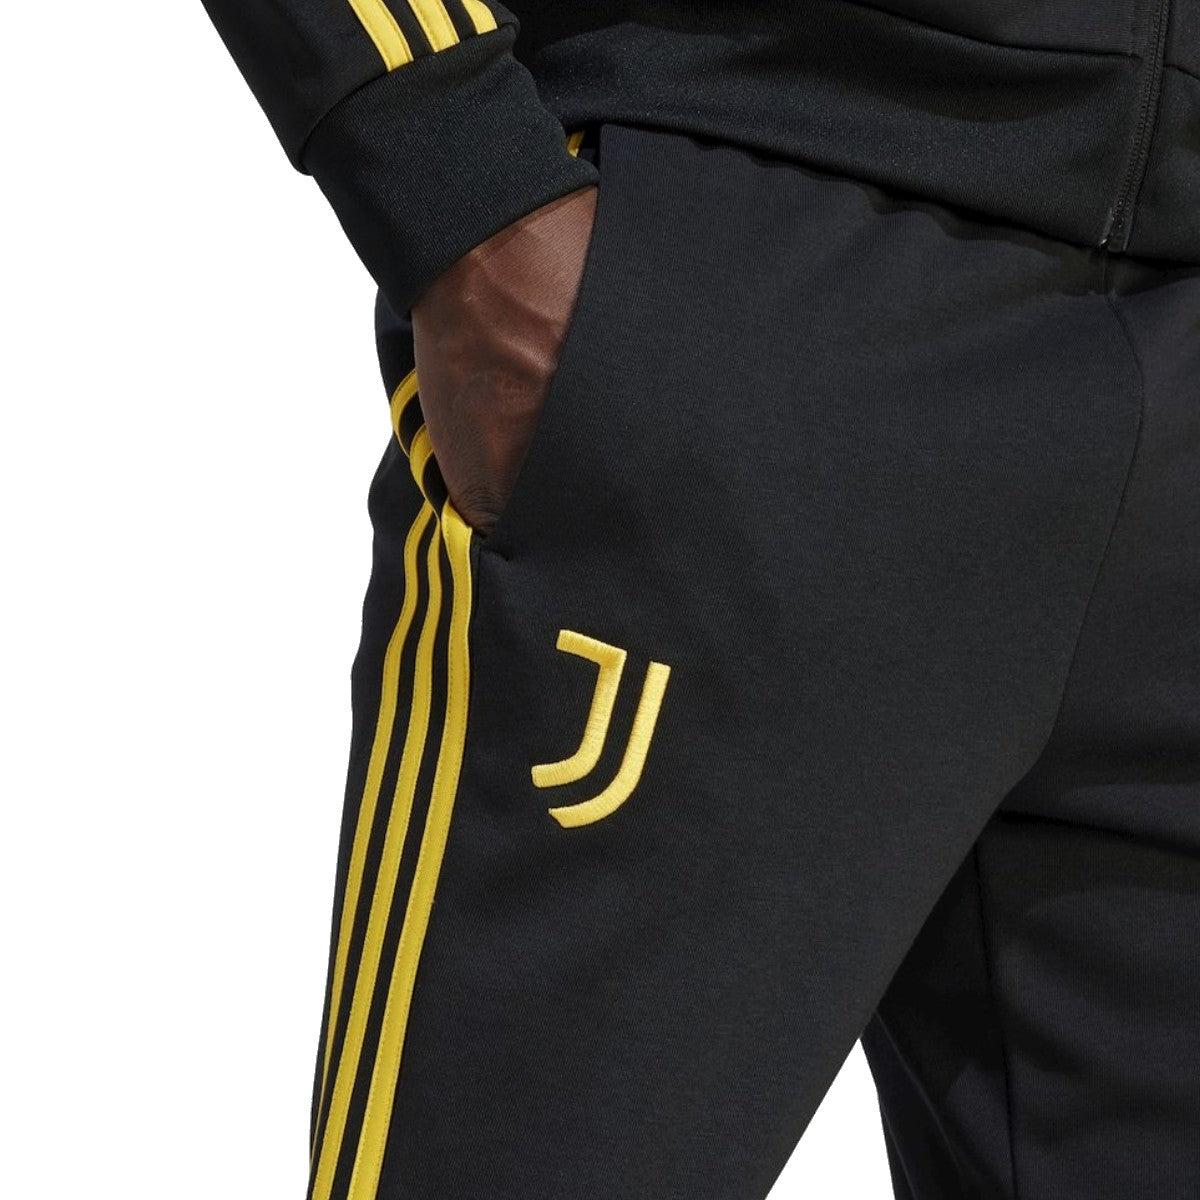 ADIDAS TRACKSUIT at Rs 900/piece | New Delhi | ID: 2853034142330